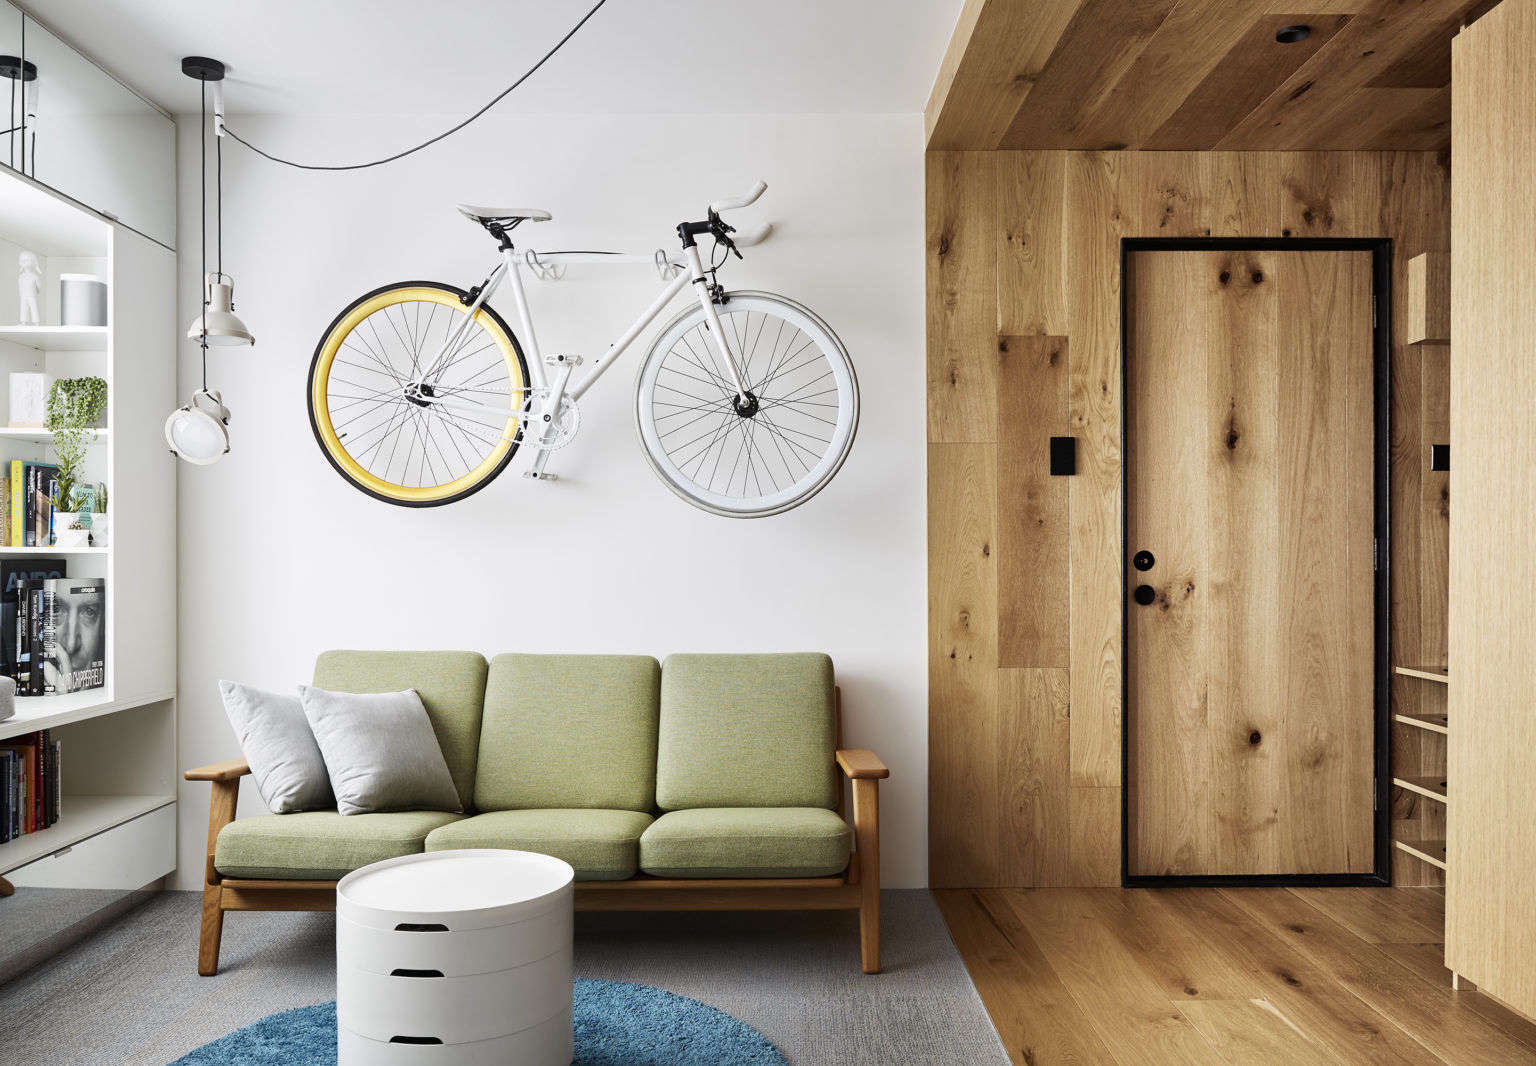 Type St. Apartment in Melbourne Living Room Bike Rack by Tsai Design